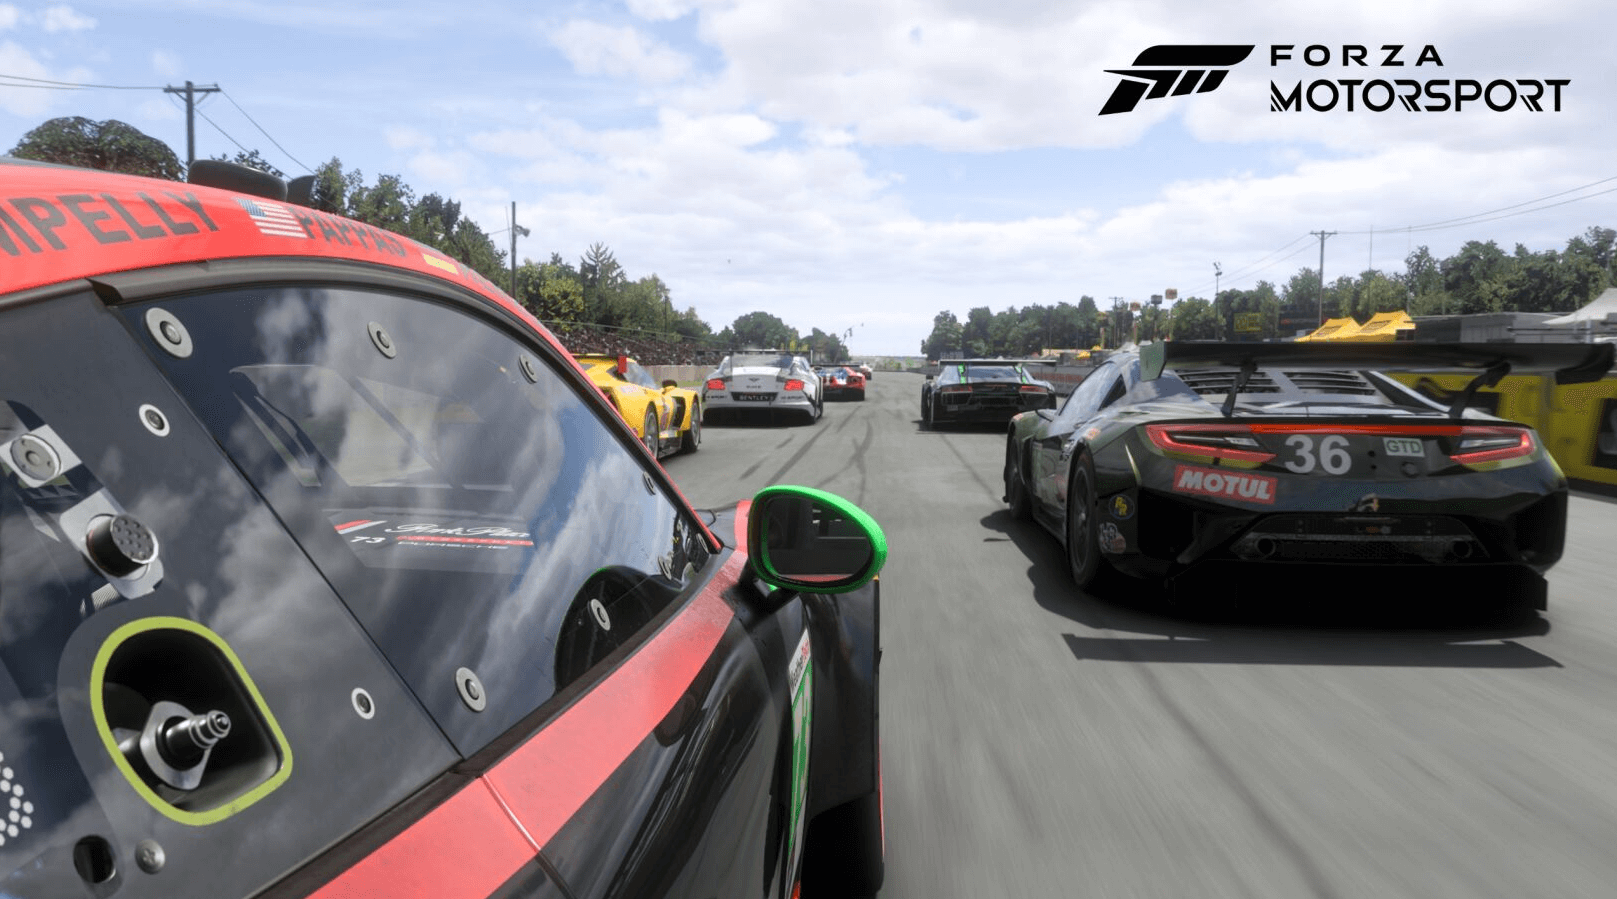 Forza Horizon 3 Wiki – Everything you need to know about the game